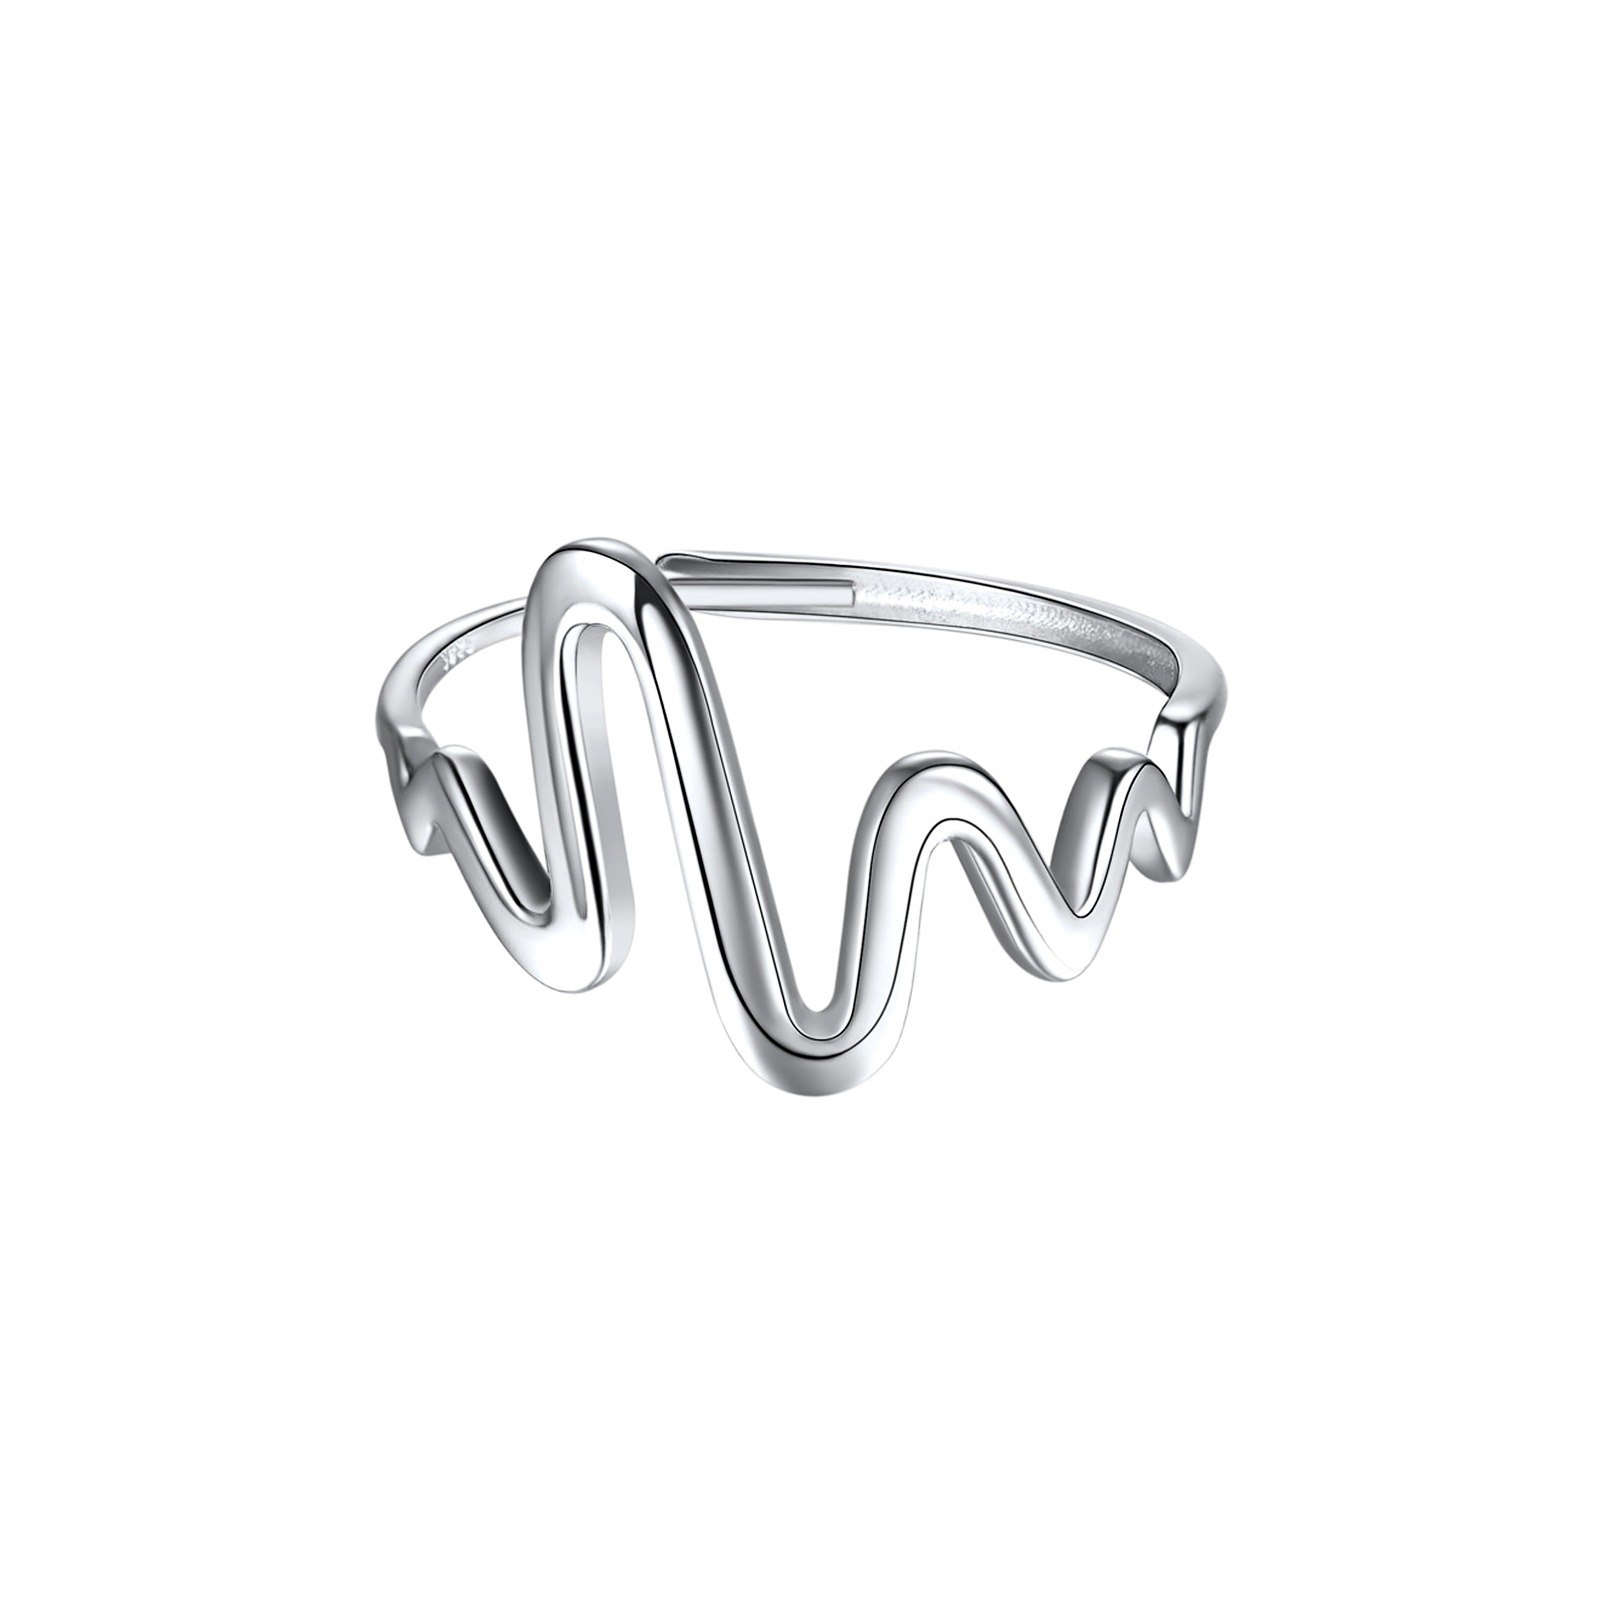 ChicSilver 925 Sterling Silver Heartbeat Ring For Women